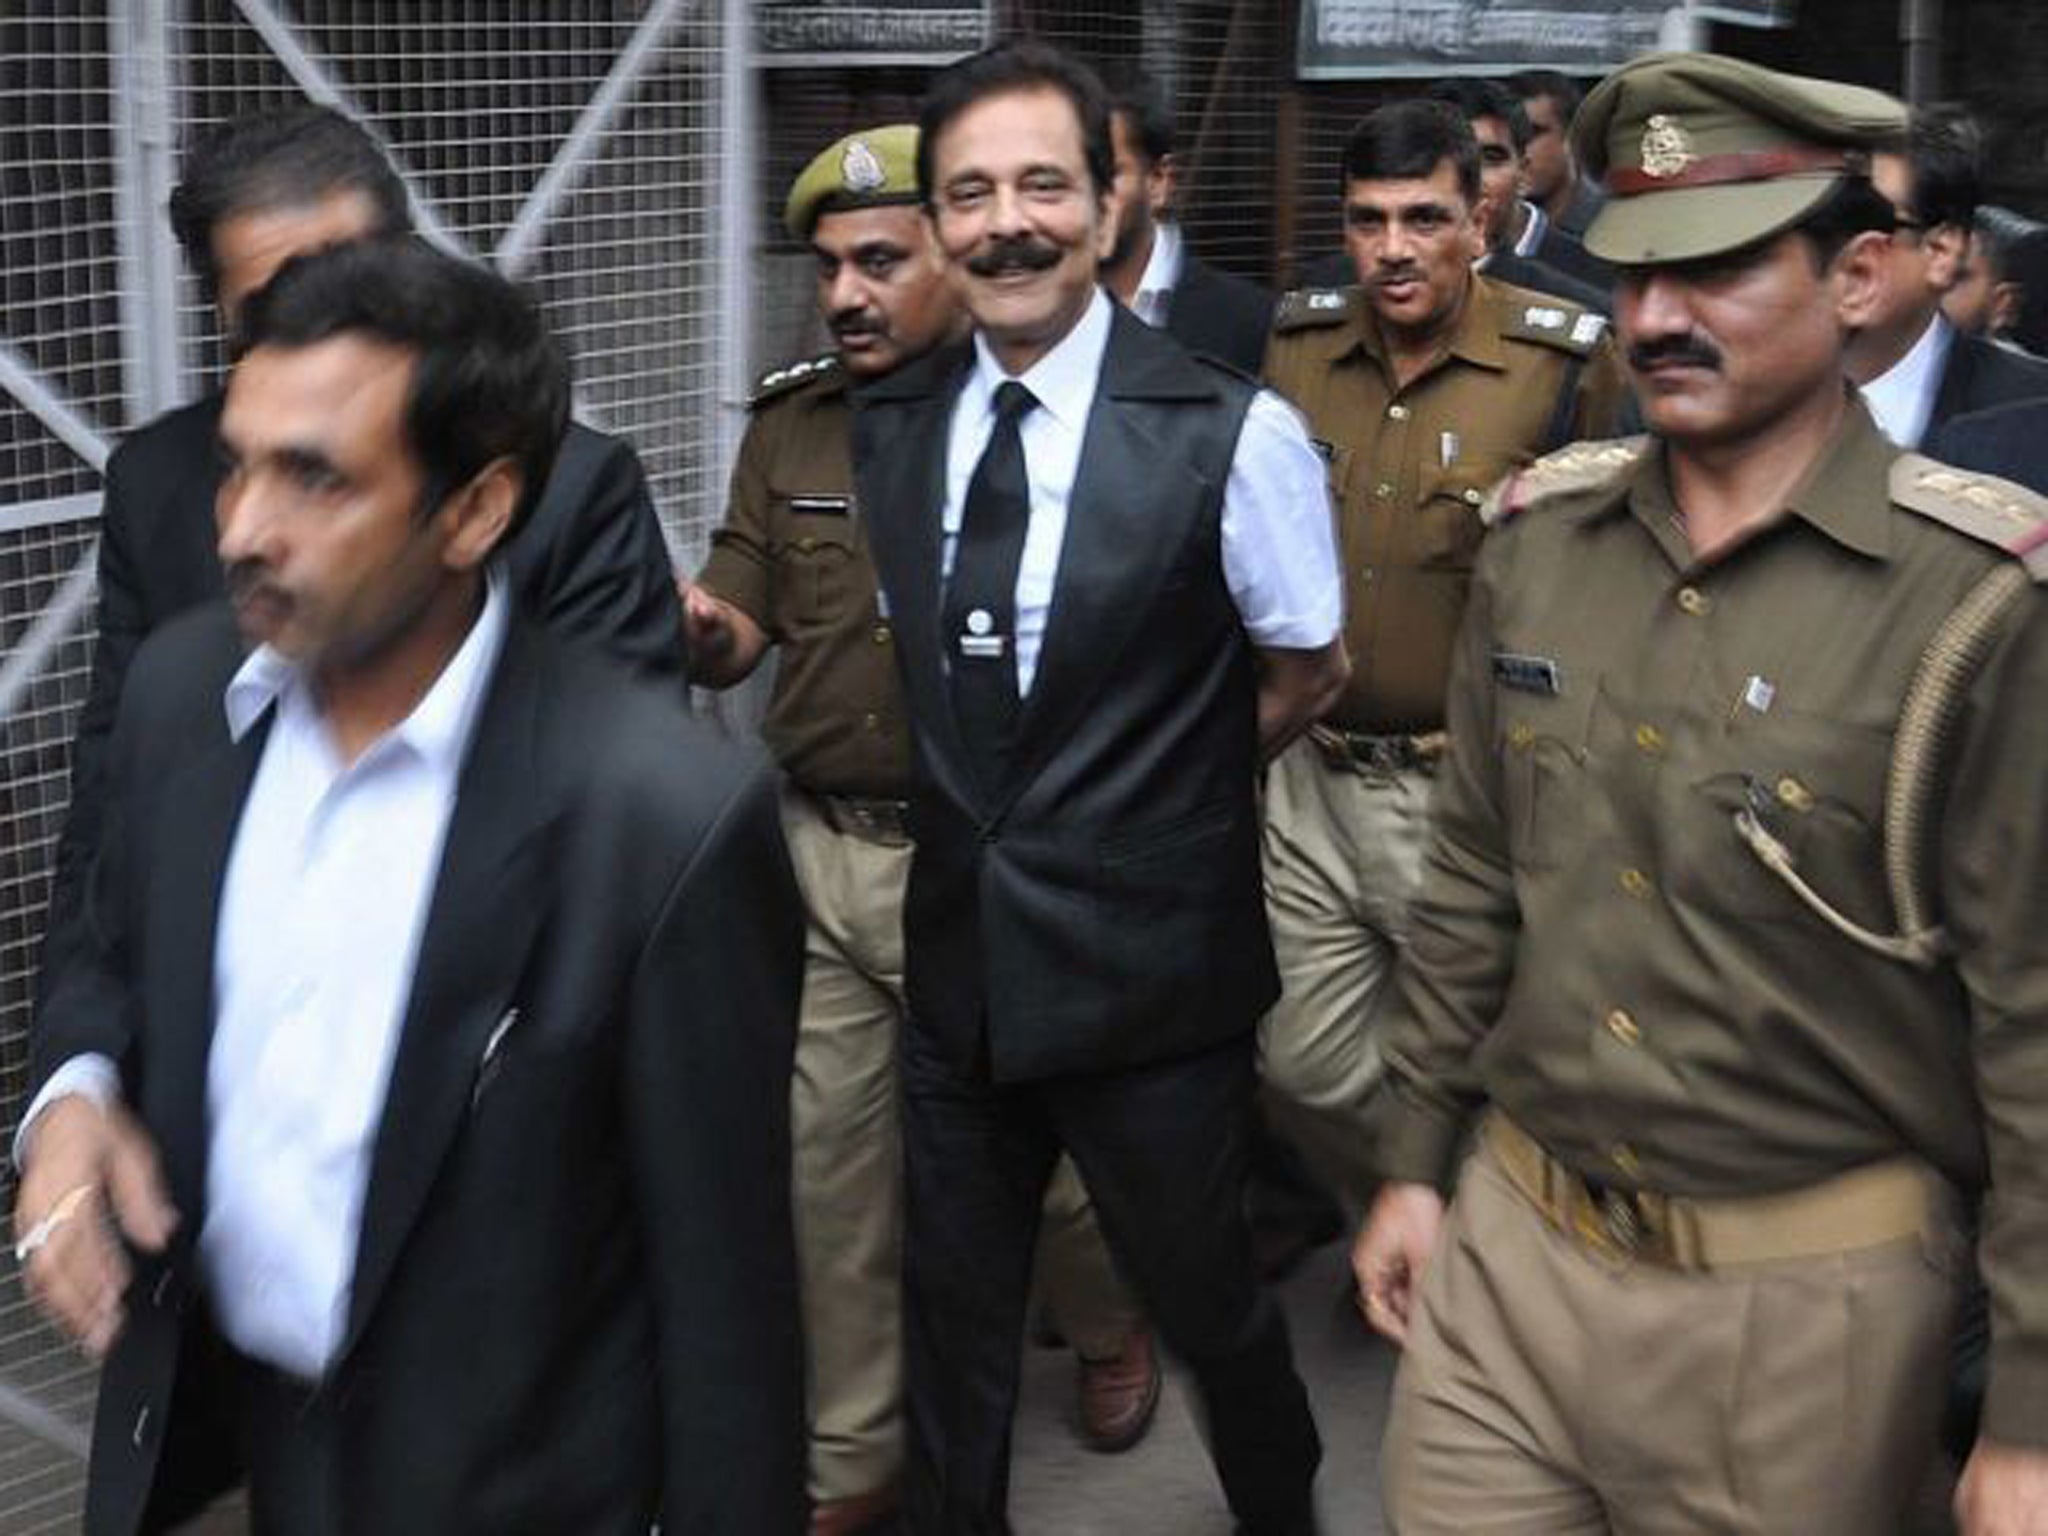 Subrata Roy surrendered to police in the state capital of Uttar Pradesh